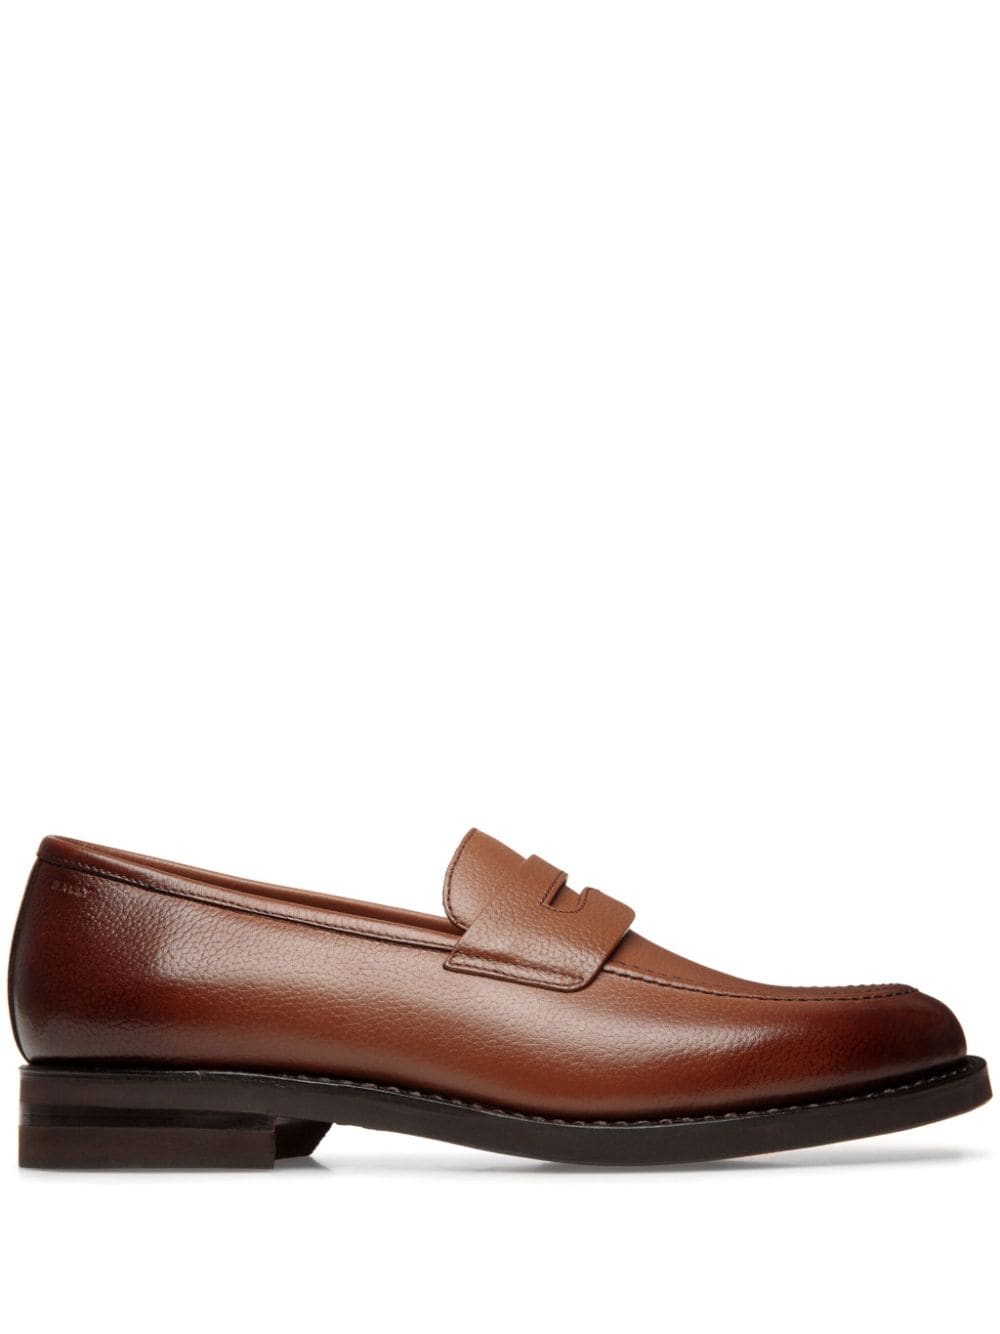 Bally leather penny loafers - Brown von Bally